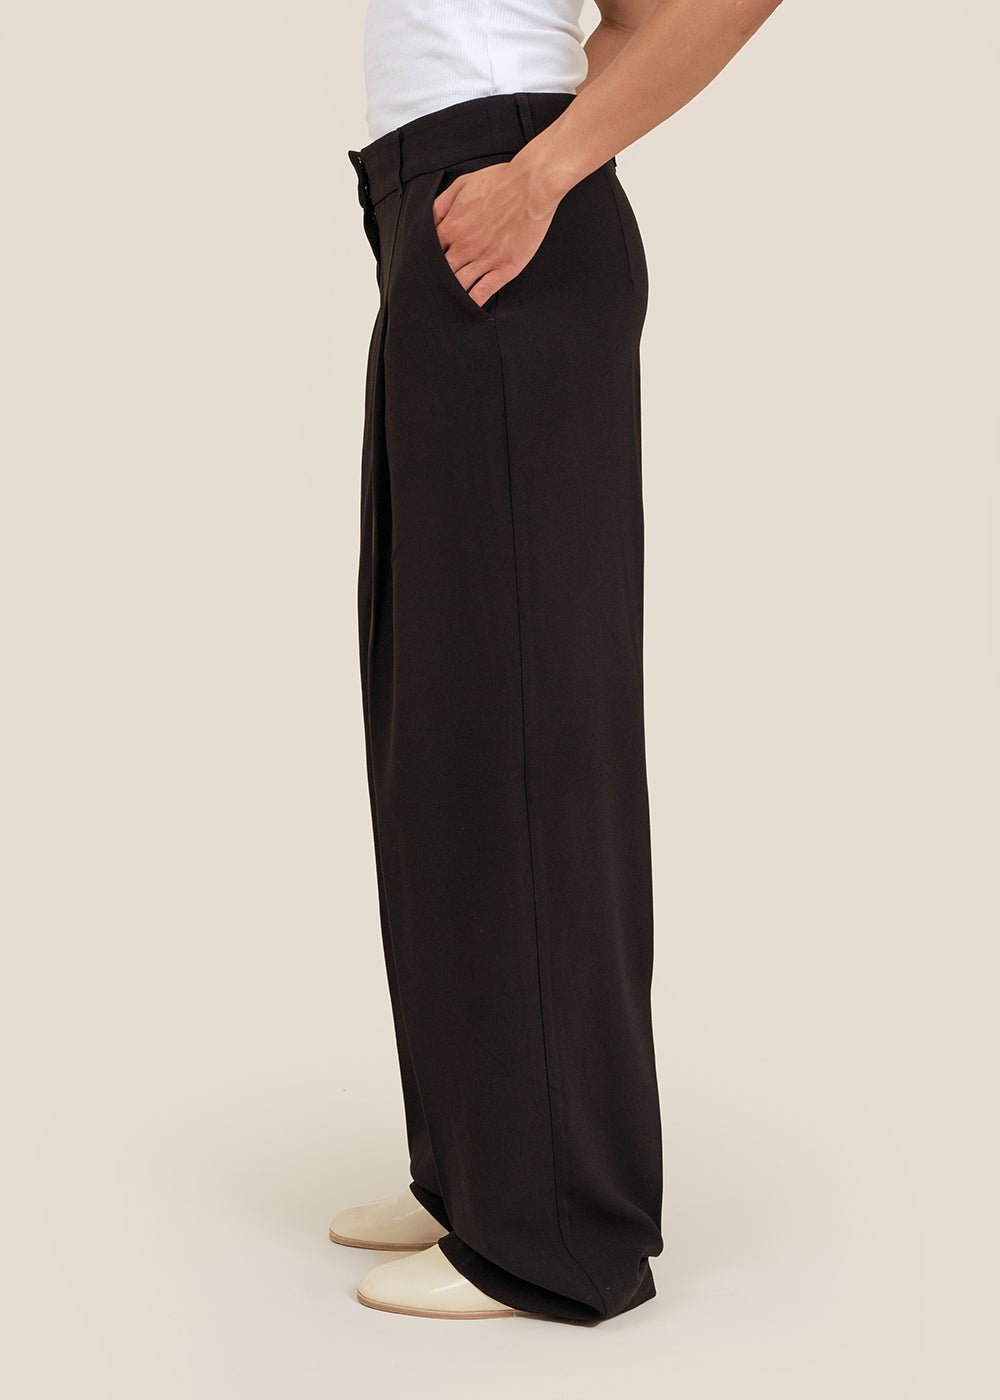 Stylein Black Brunella Trousers - New Classics Studios Sustainable Ethical Fashion Canada